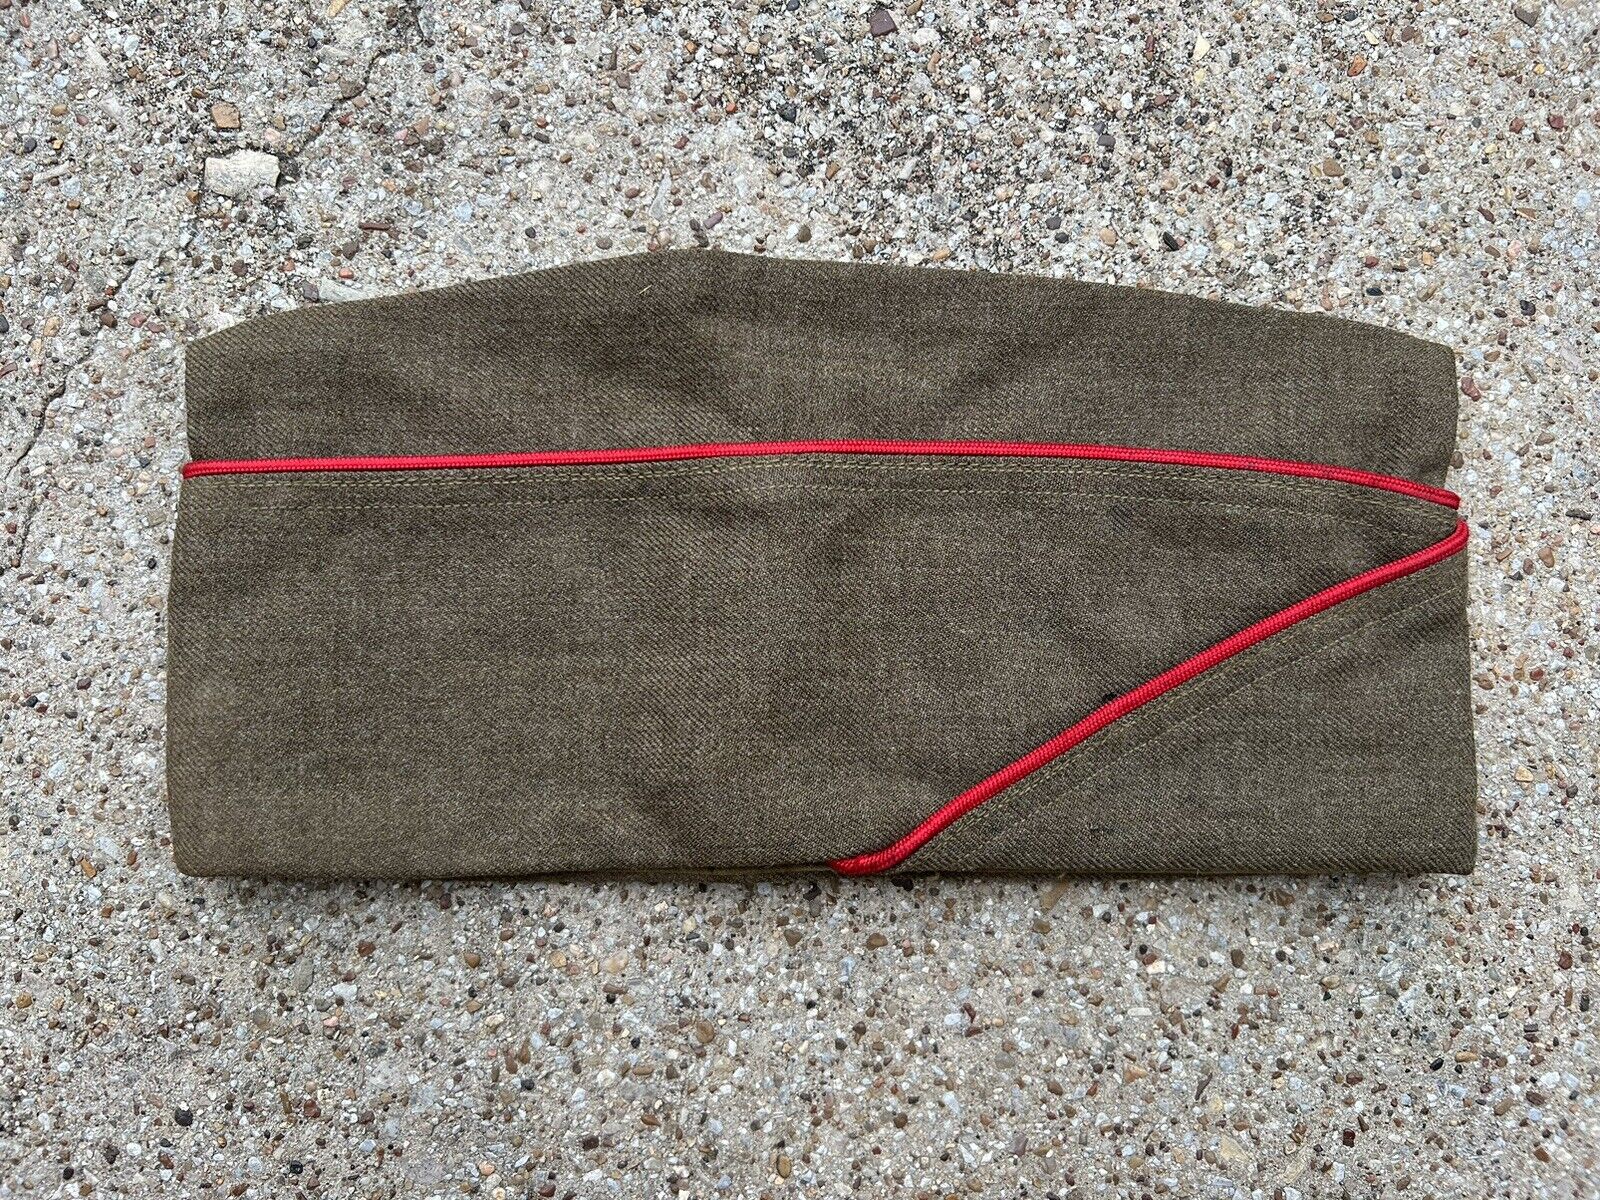 Vtg US Military Army Garrison Envelope Wool Cap Size 7⅛ 7 1/8 M-1950 Dated 1950